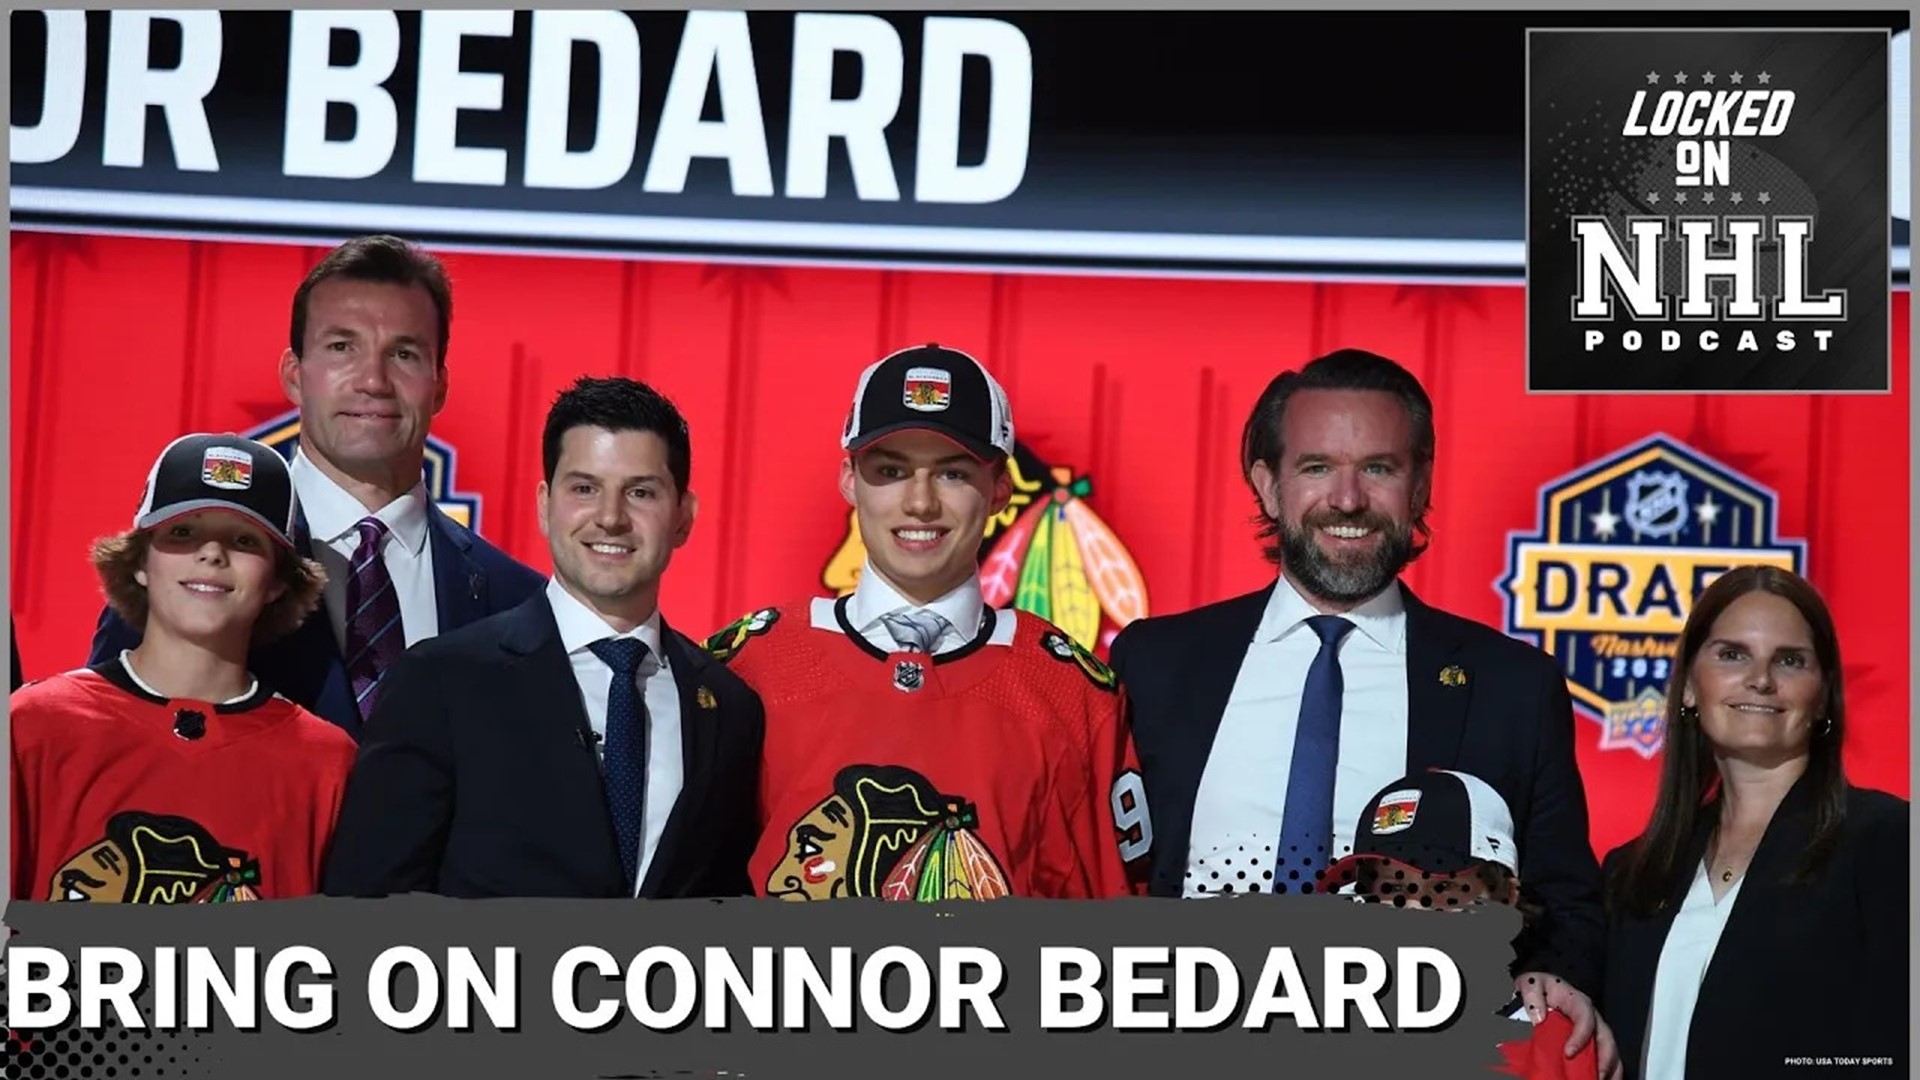 Chicago Blackhawks take Bedard with first pick in NHL draft